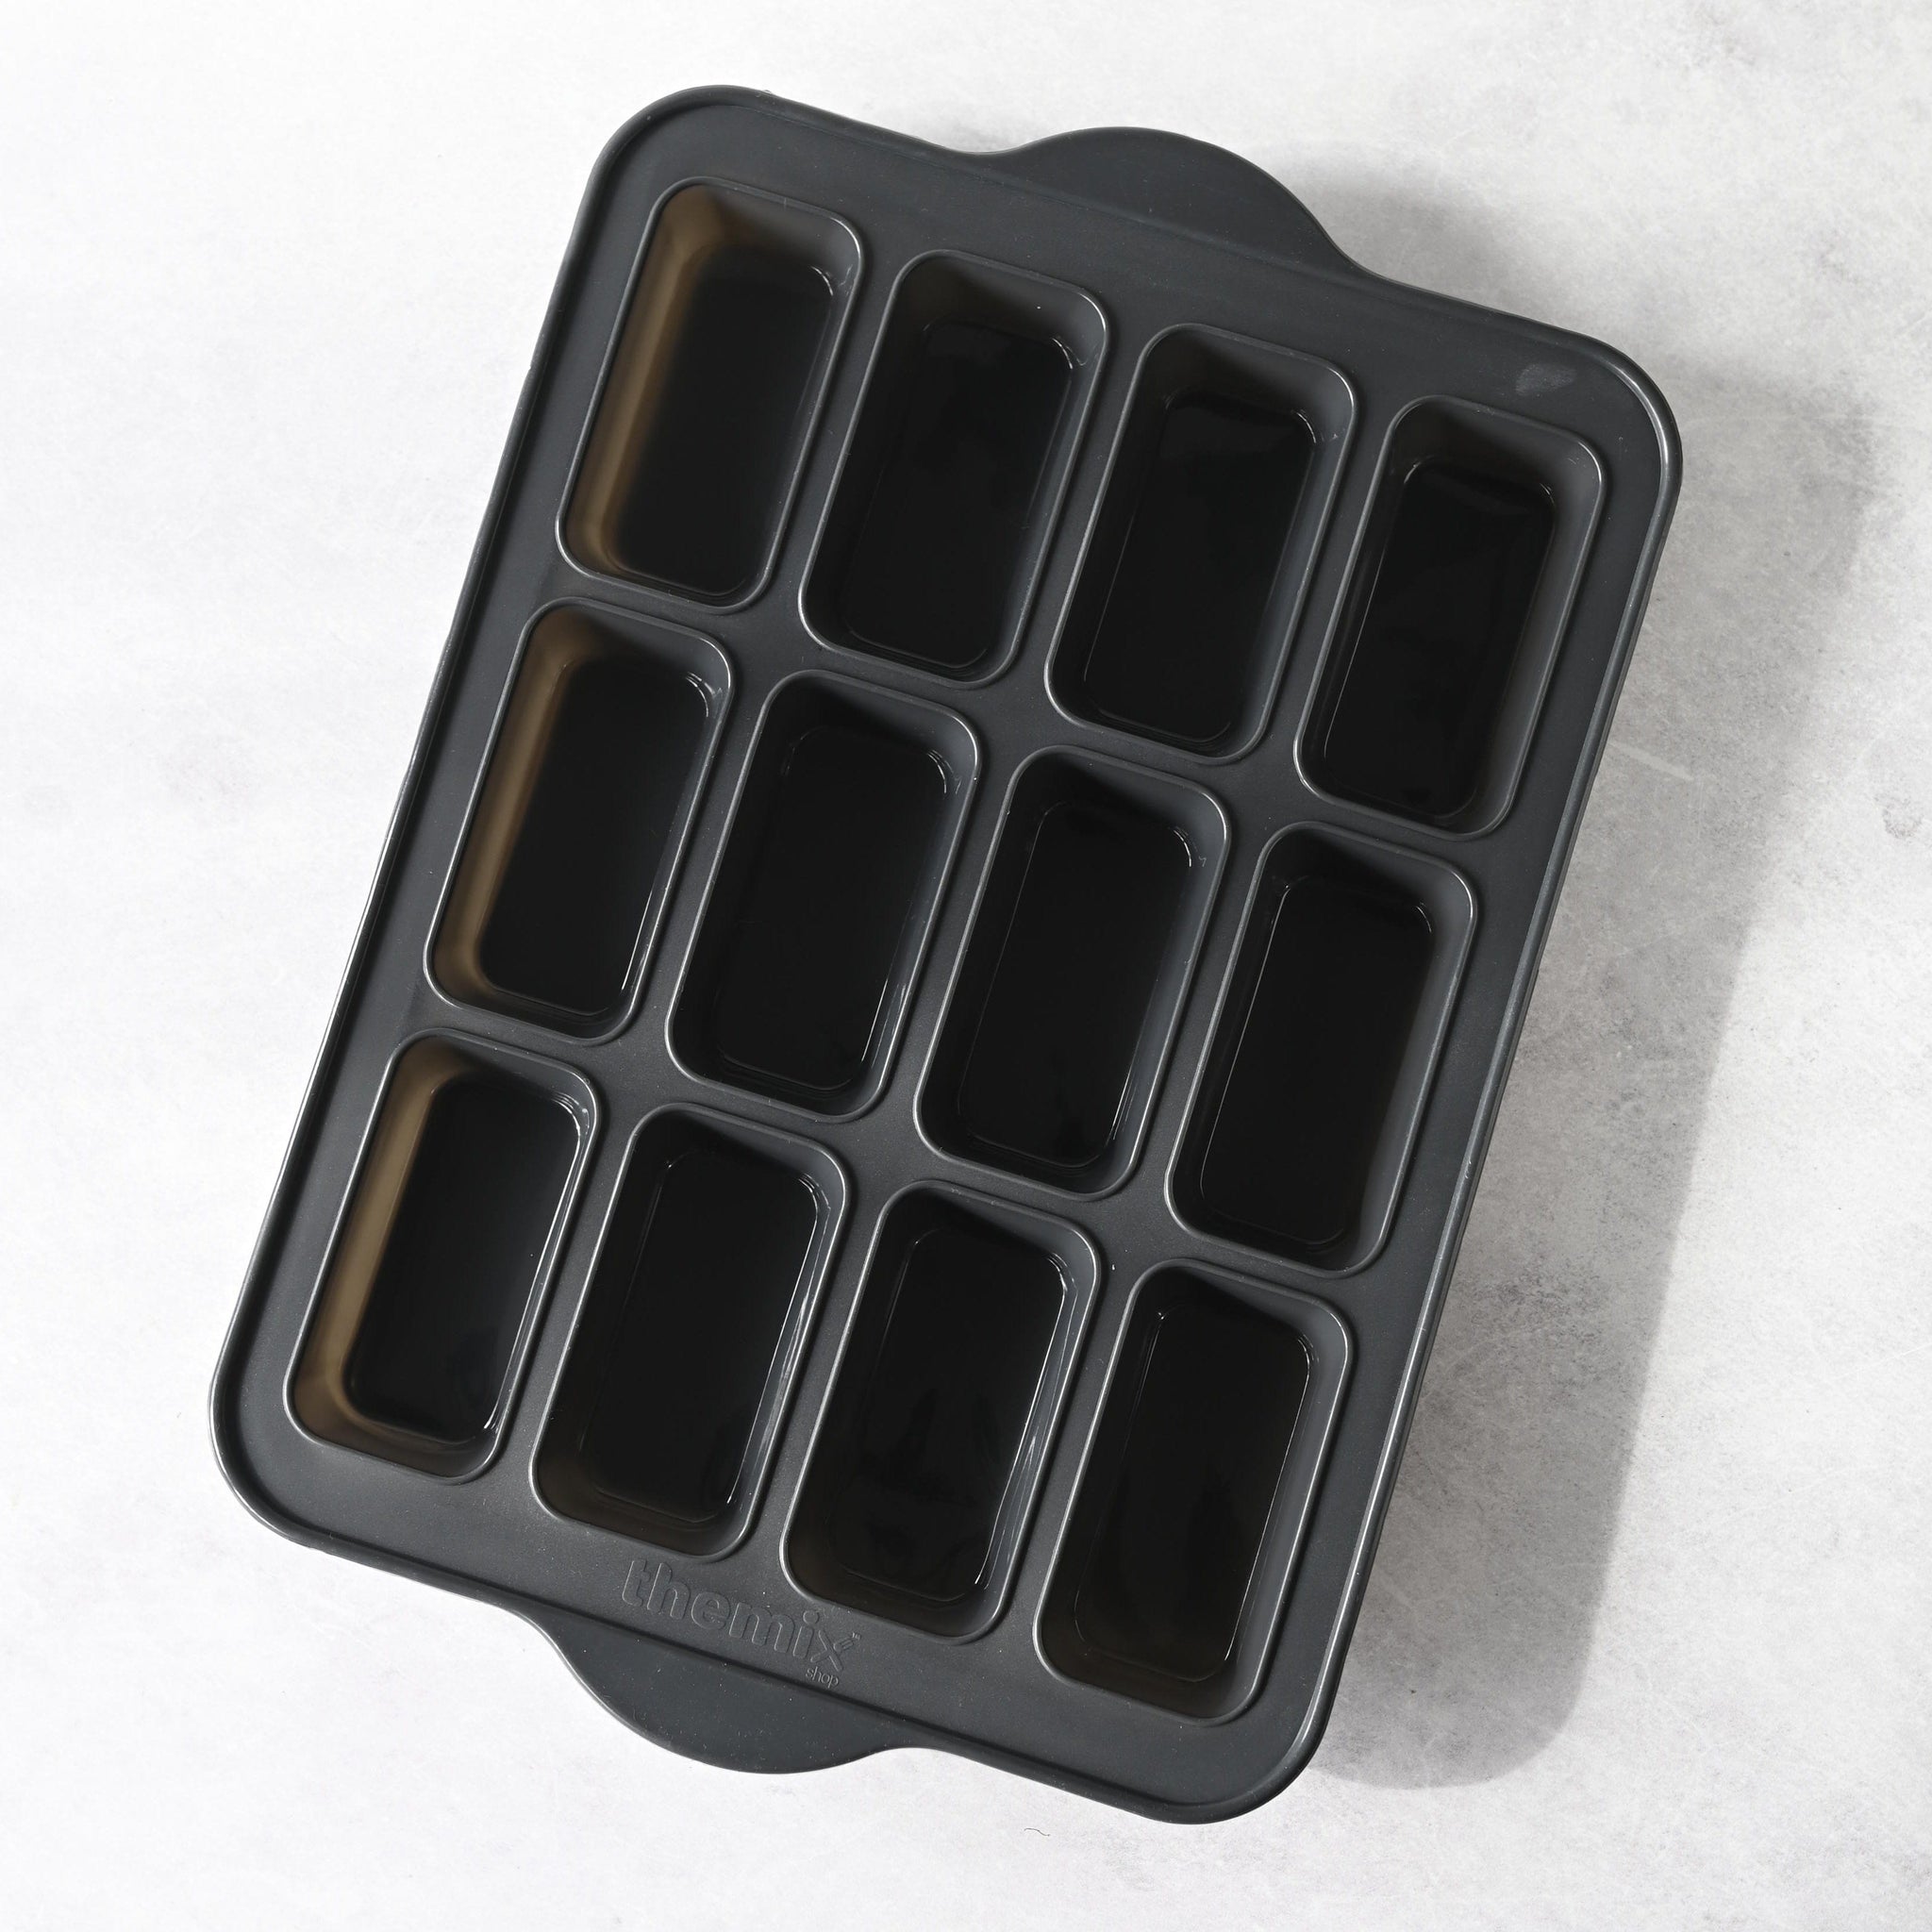 TheMix Shop Bakeware Silicone Mini Loaf Pan - Steel Frame